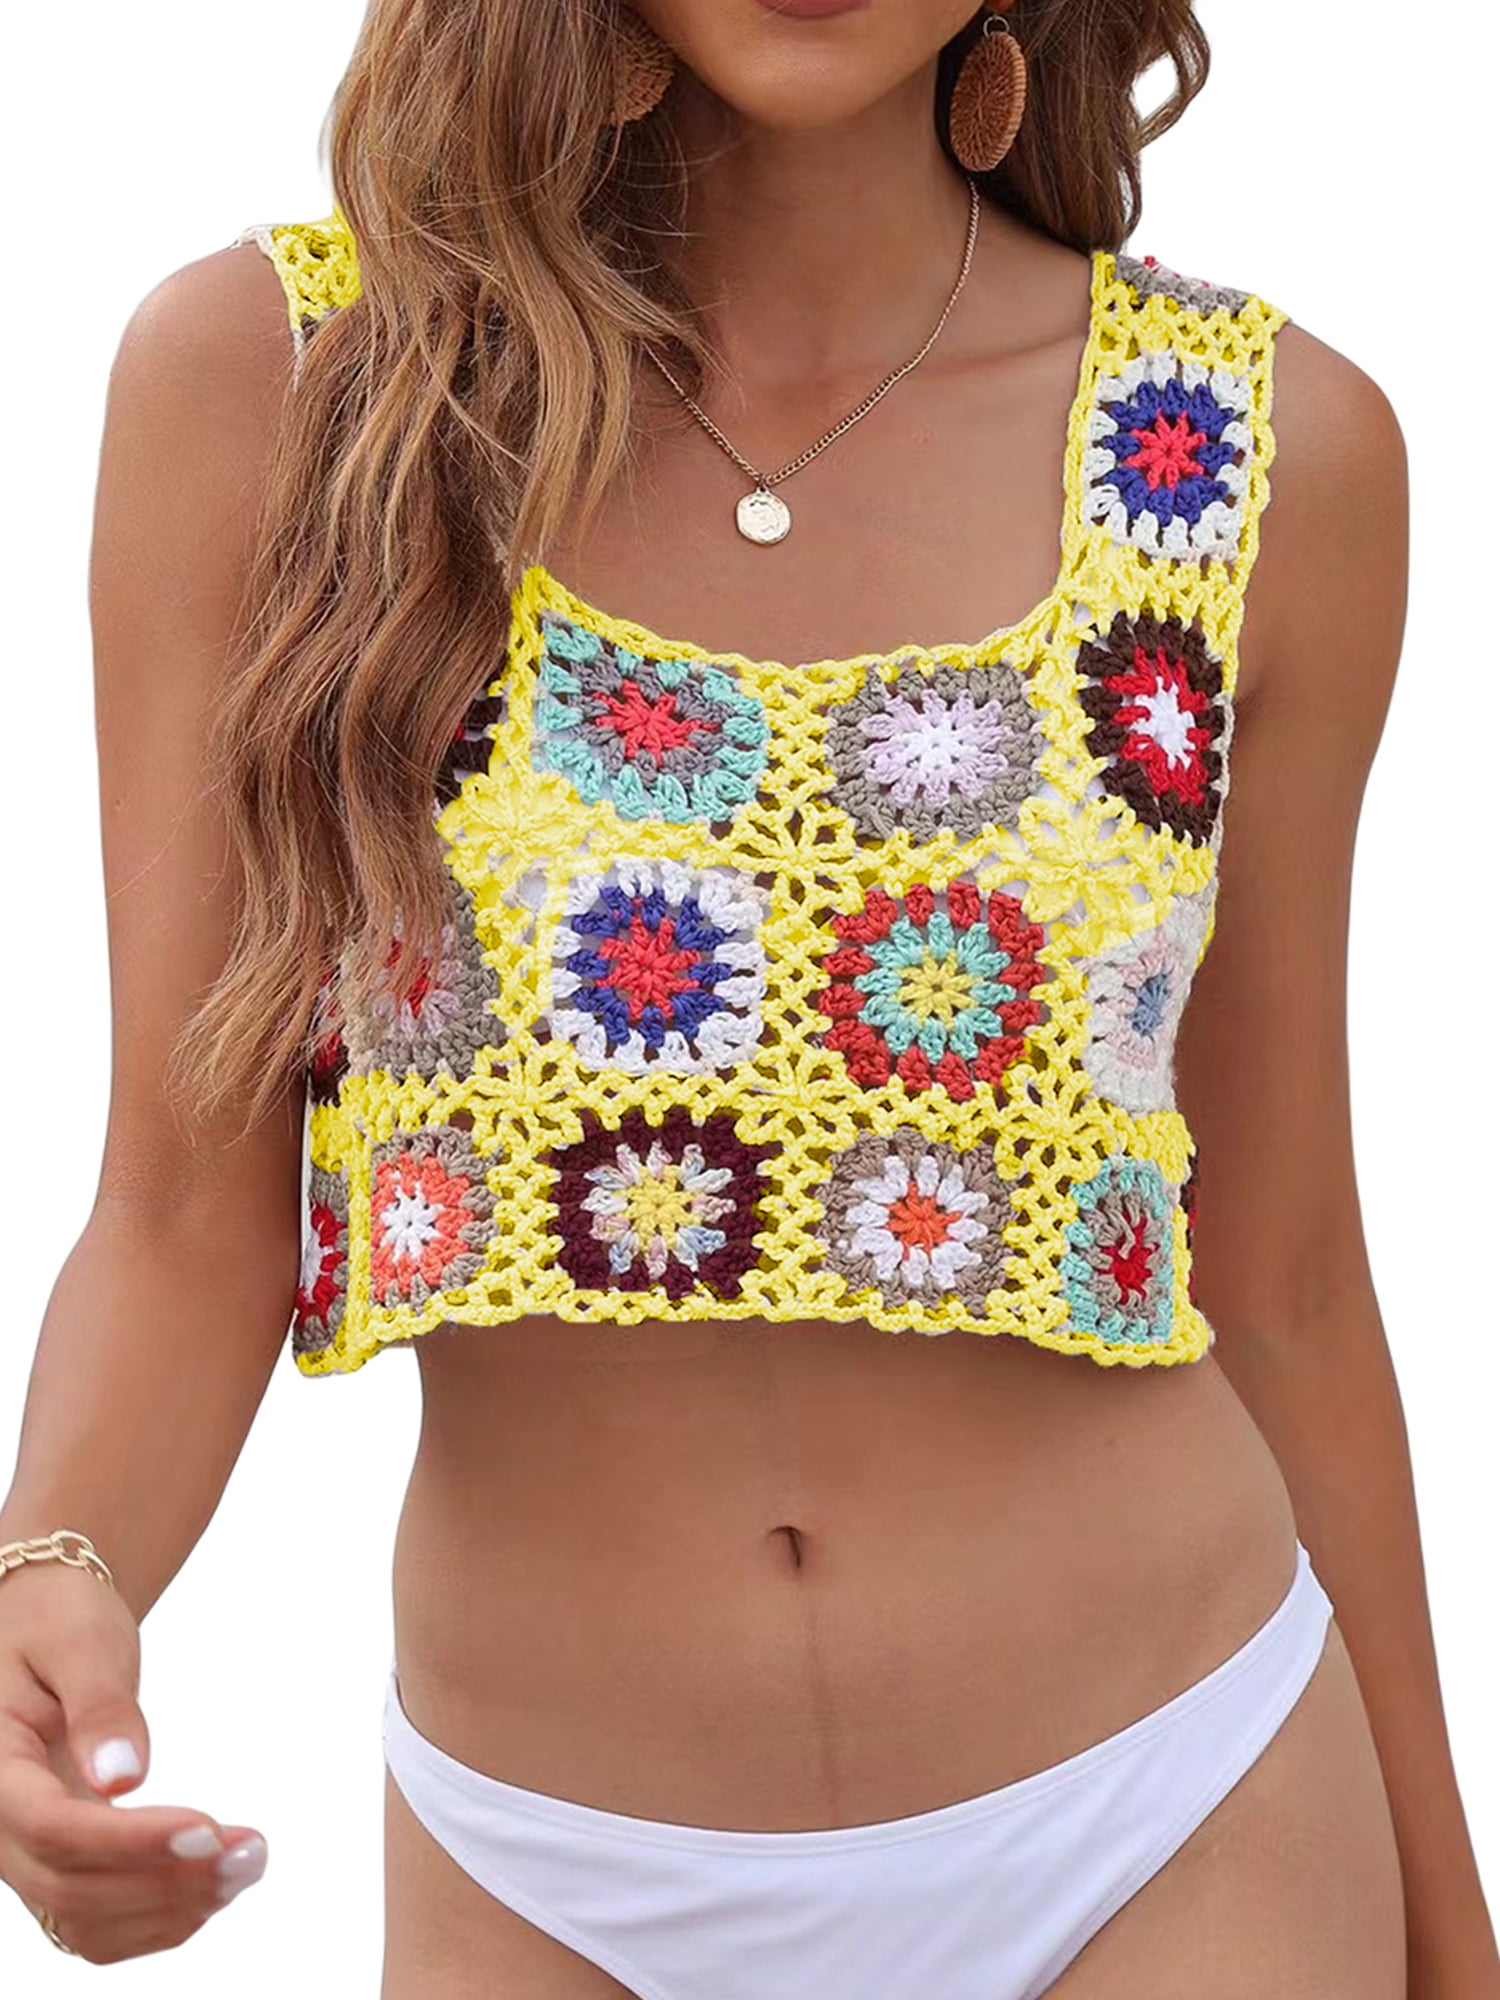 Women's Summer Crochet Tank Top Colorful Floral Embroidery Knit